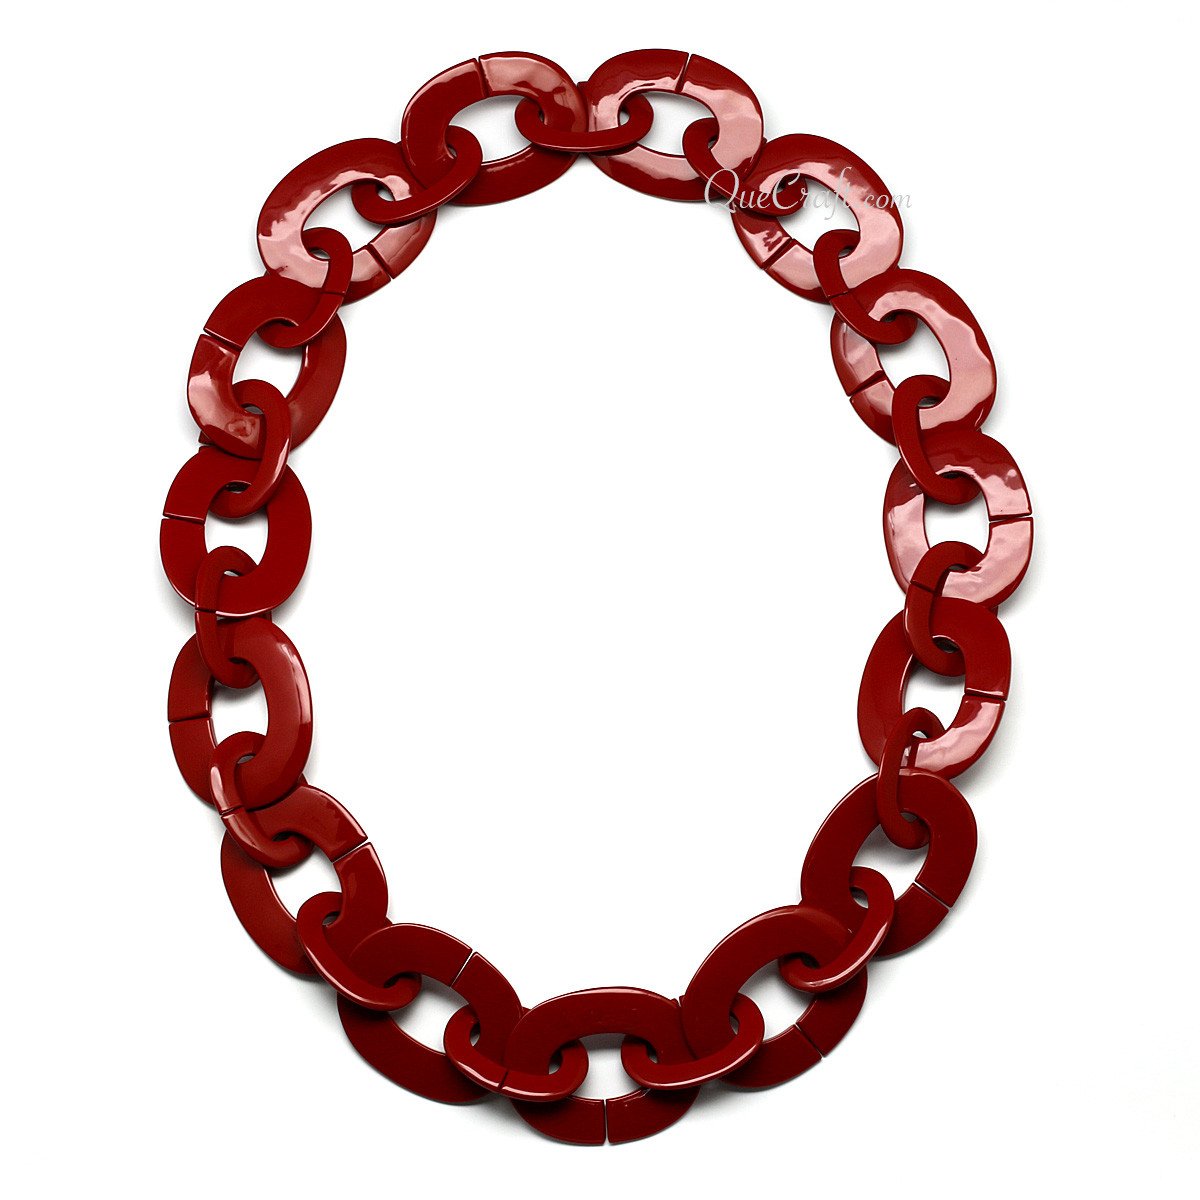 Horn & Lacquer Chain Necklace #11071 - HORN JEWELRY